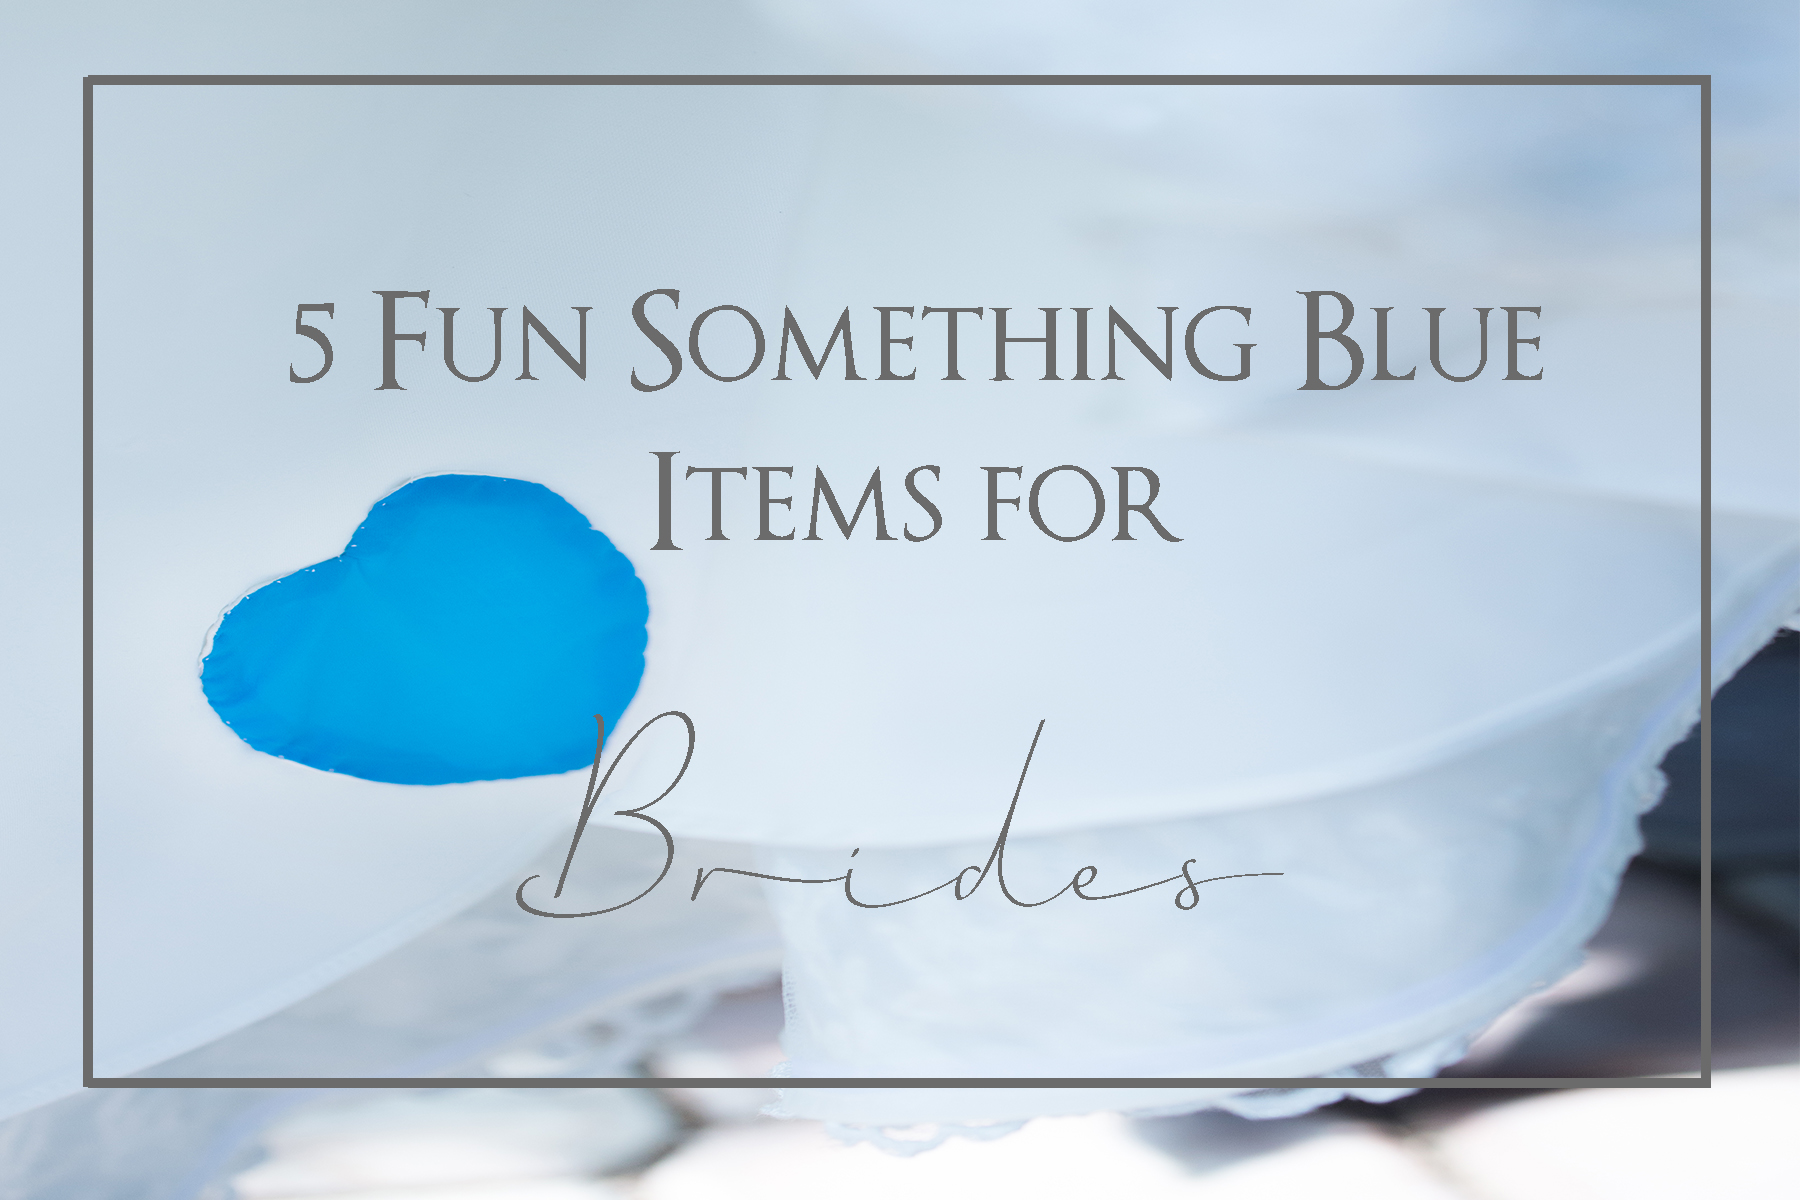 7 fun something blue items for brides feature photo with blue heart sewn into brides dress